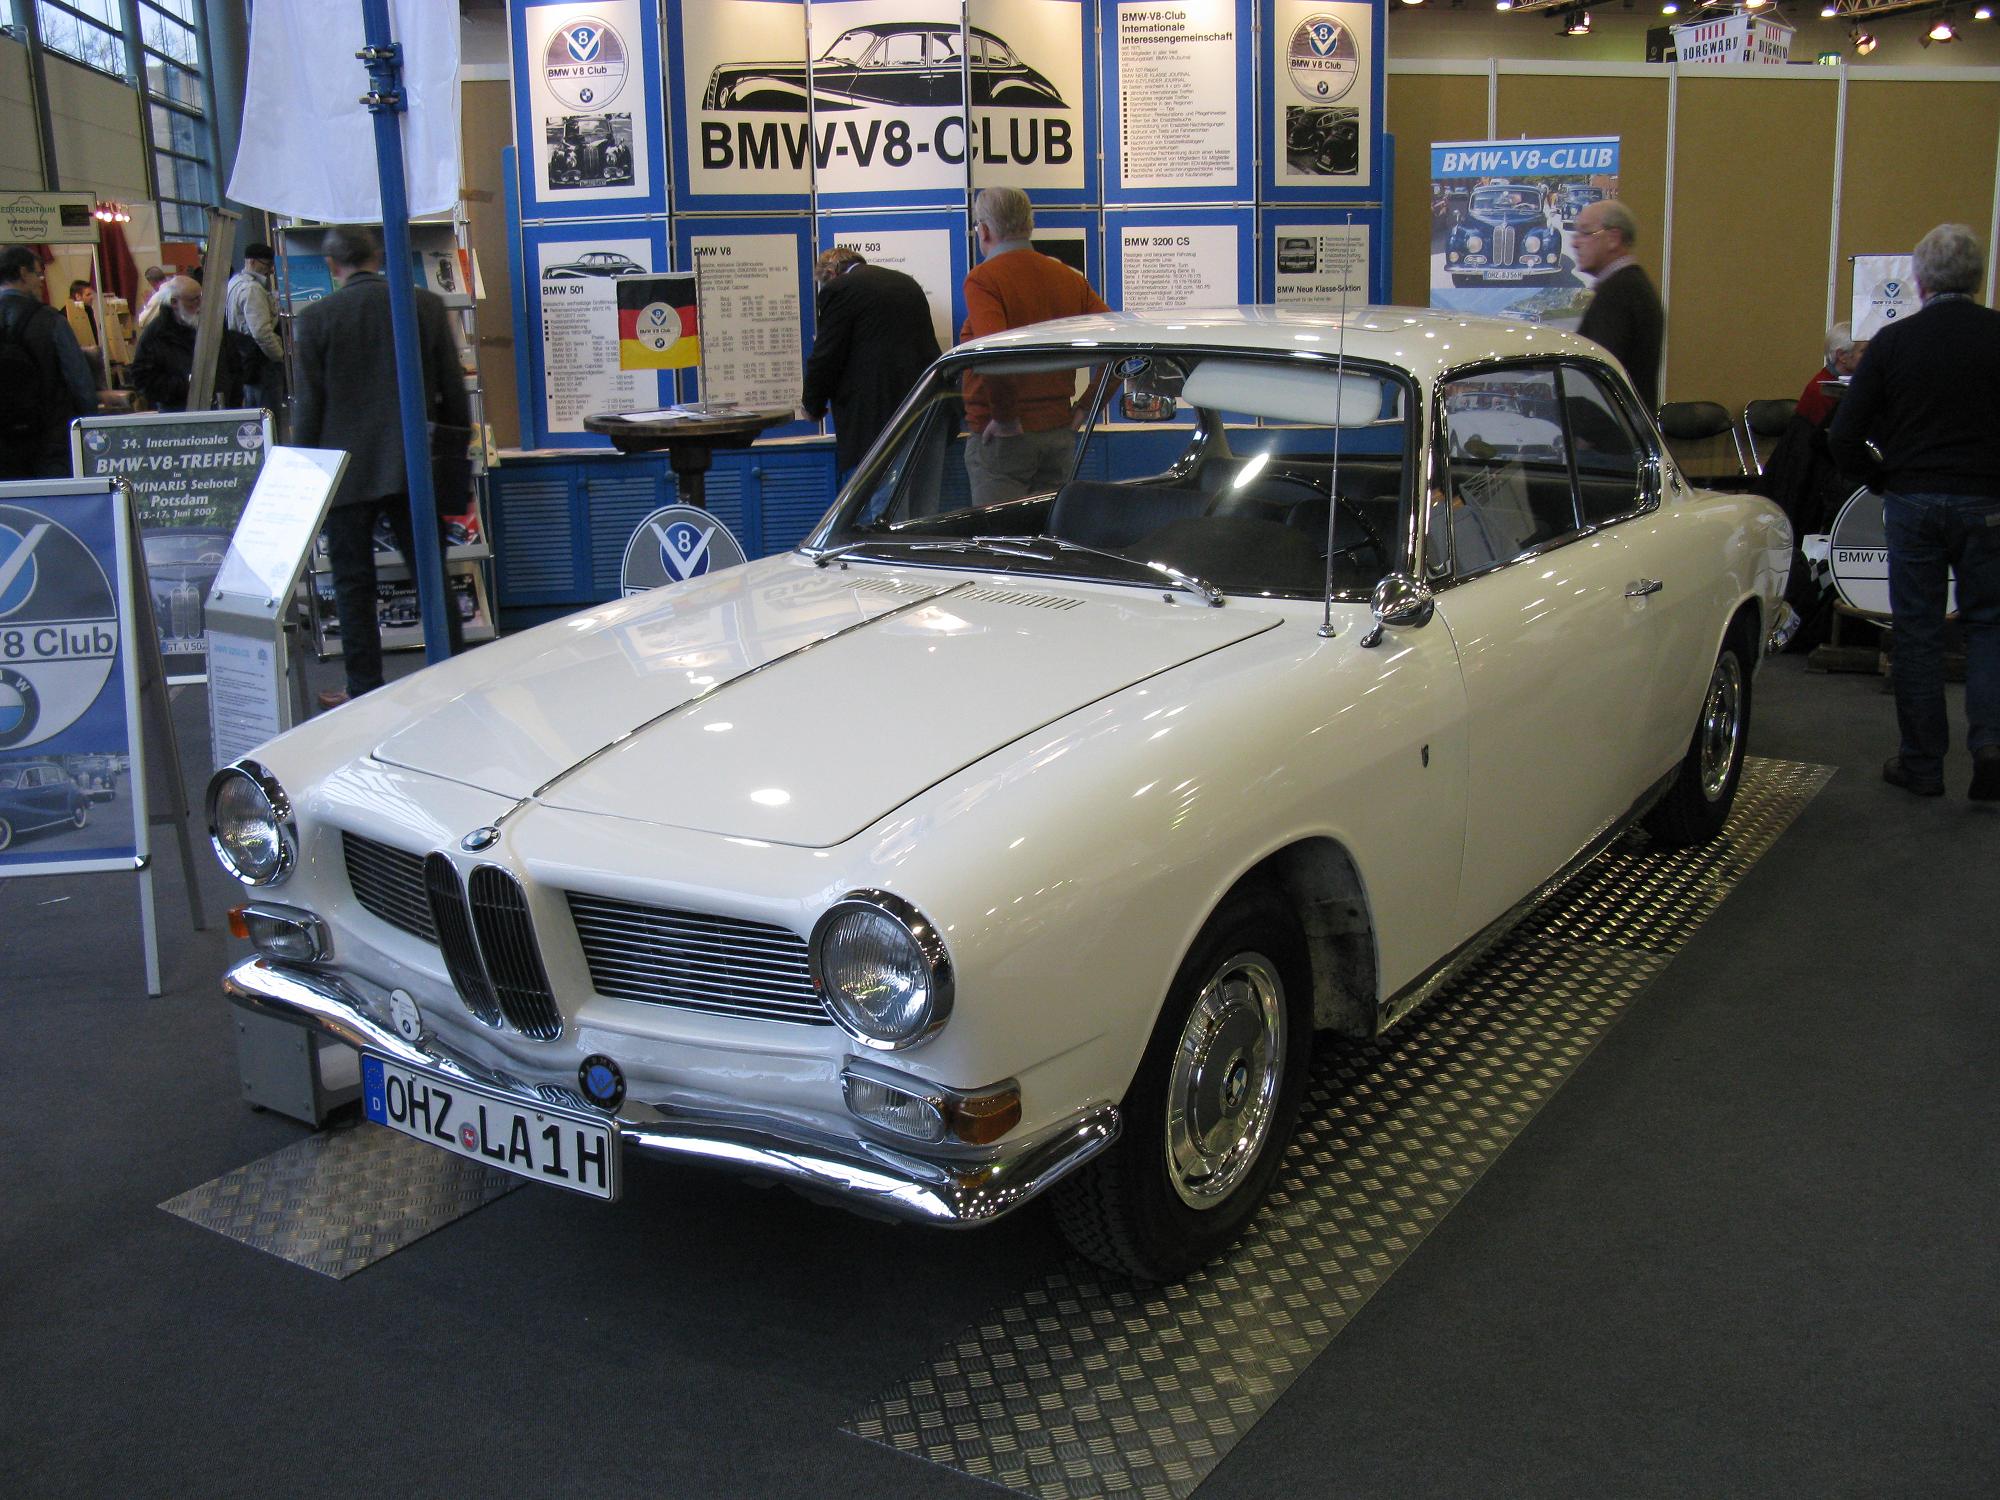 a classic car on display in a museum